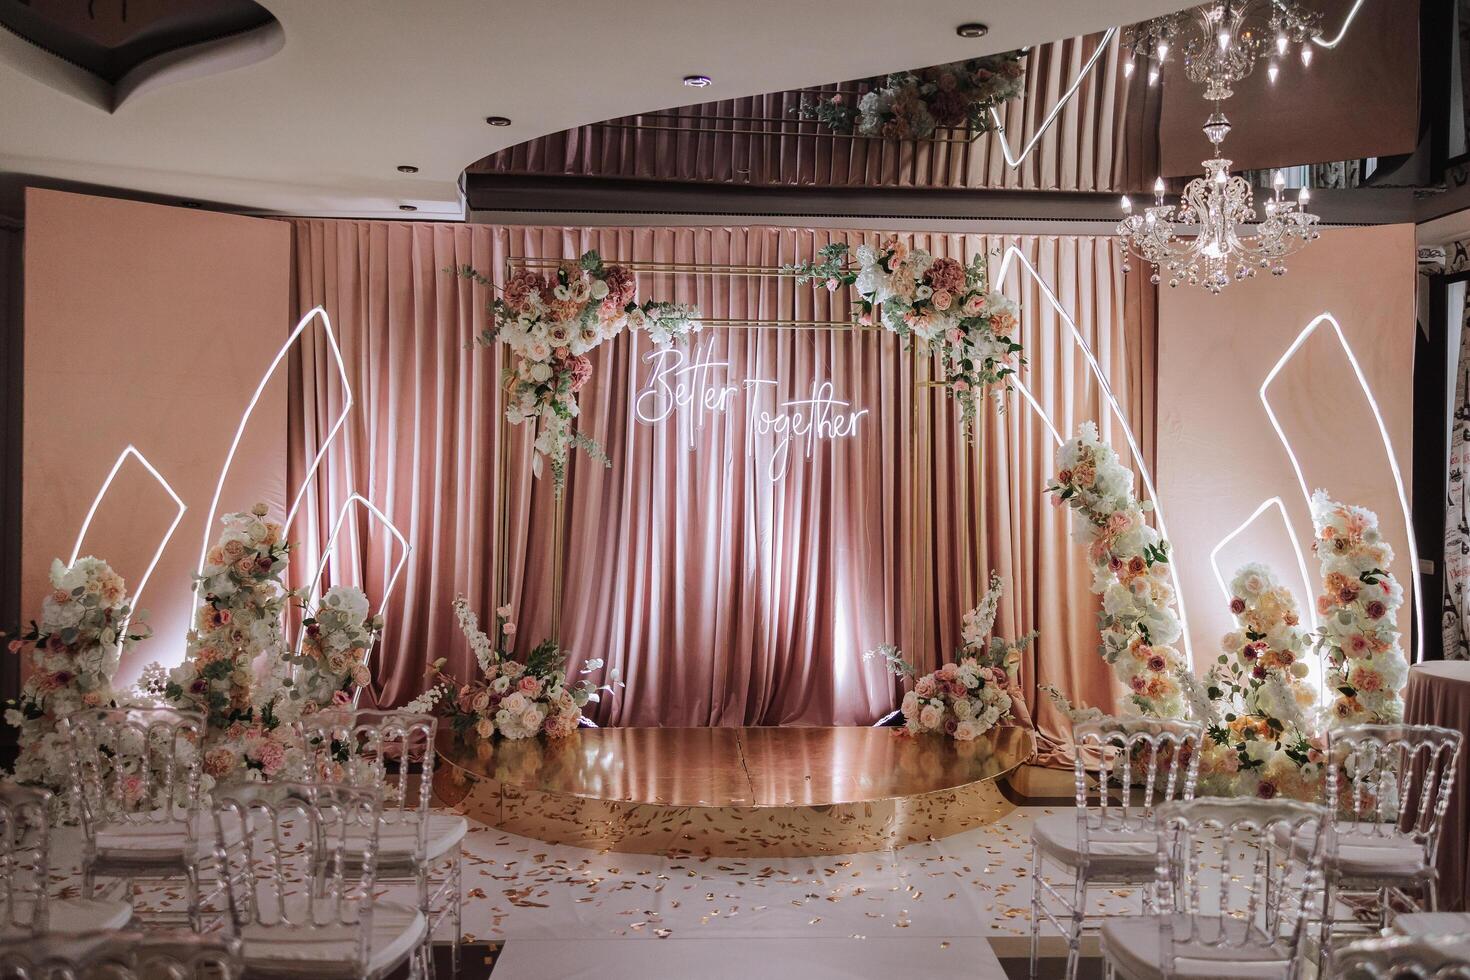 A beautifully decorated place for the wedding ceremony of the bride and groom in a modern style. Wedding arch made of white and pink fresh flowers. Beautiful decorative chairs and gilded legs photo